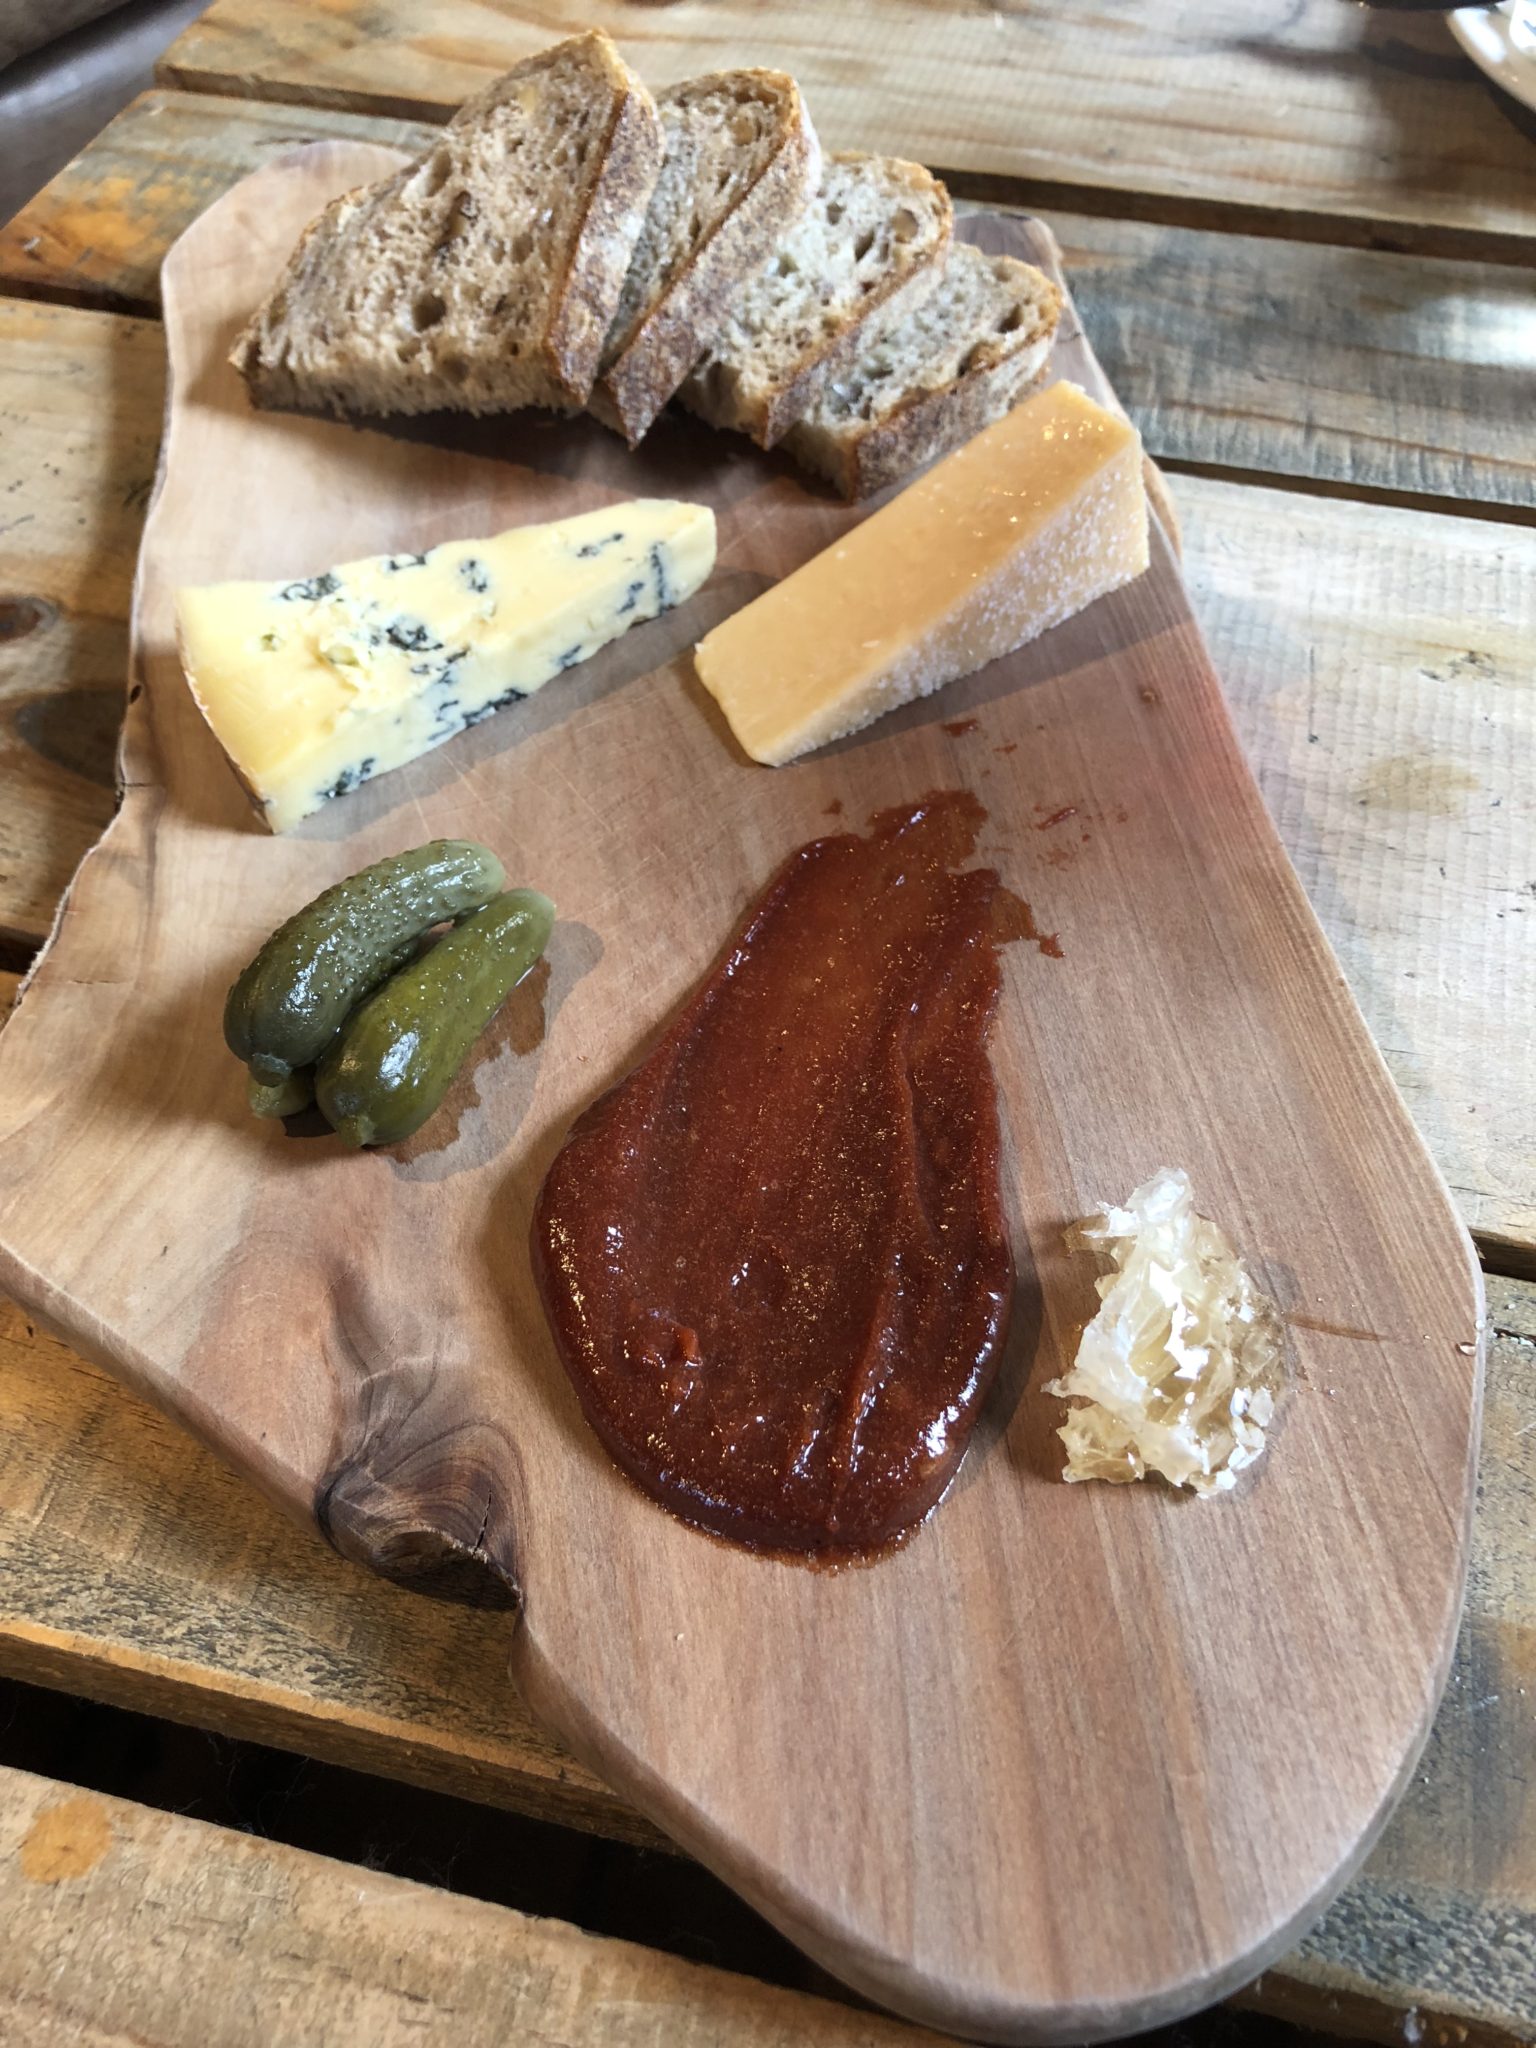 Our second cheese plate for the day at Gibbston Valley Winery